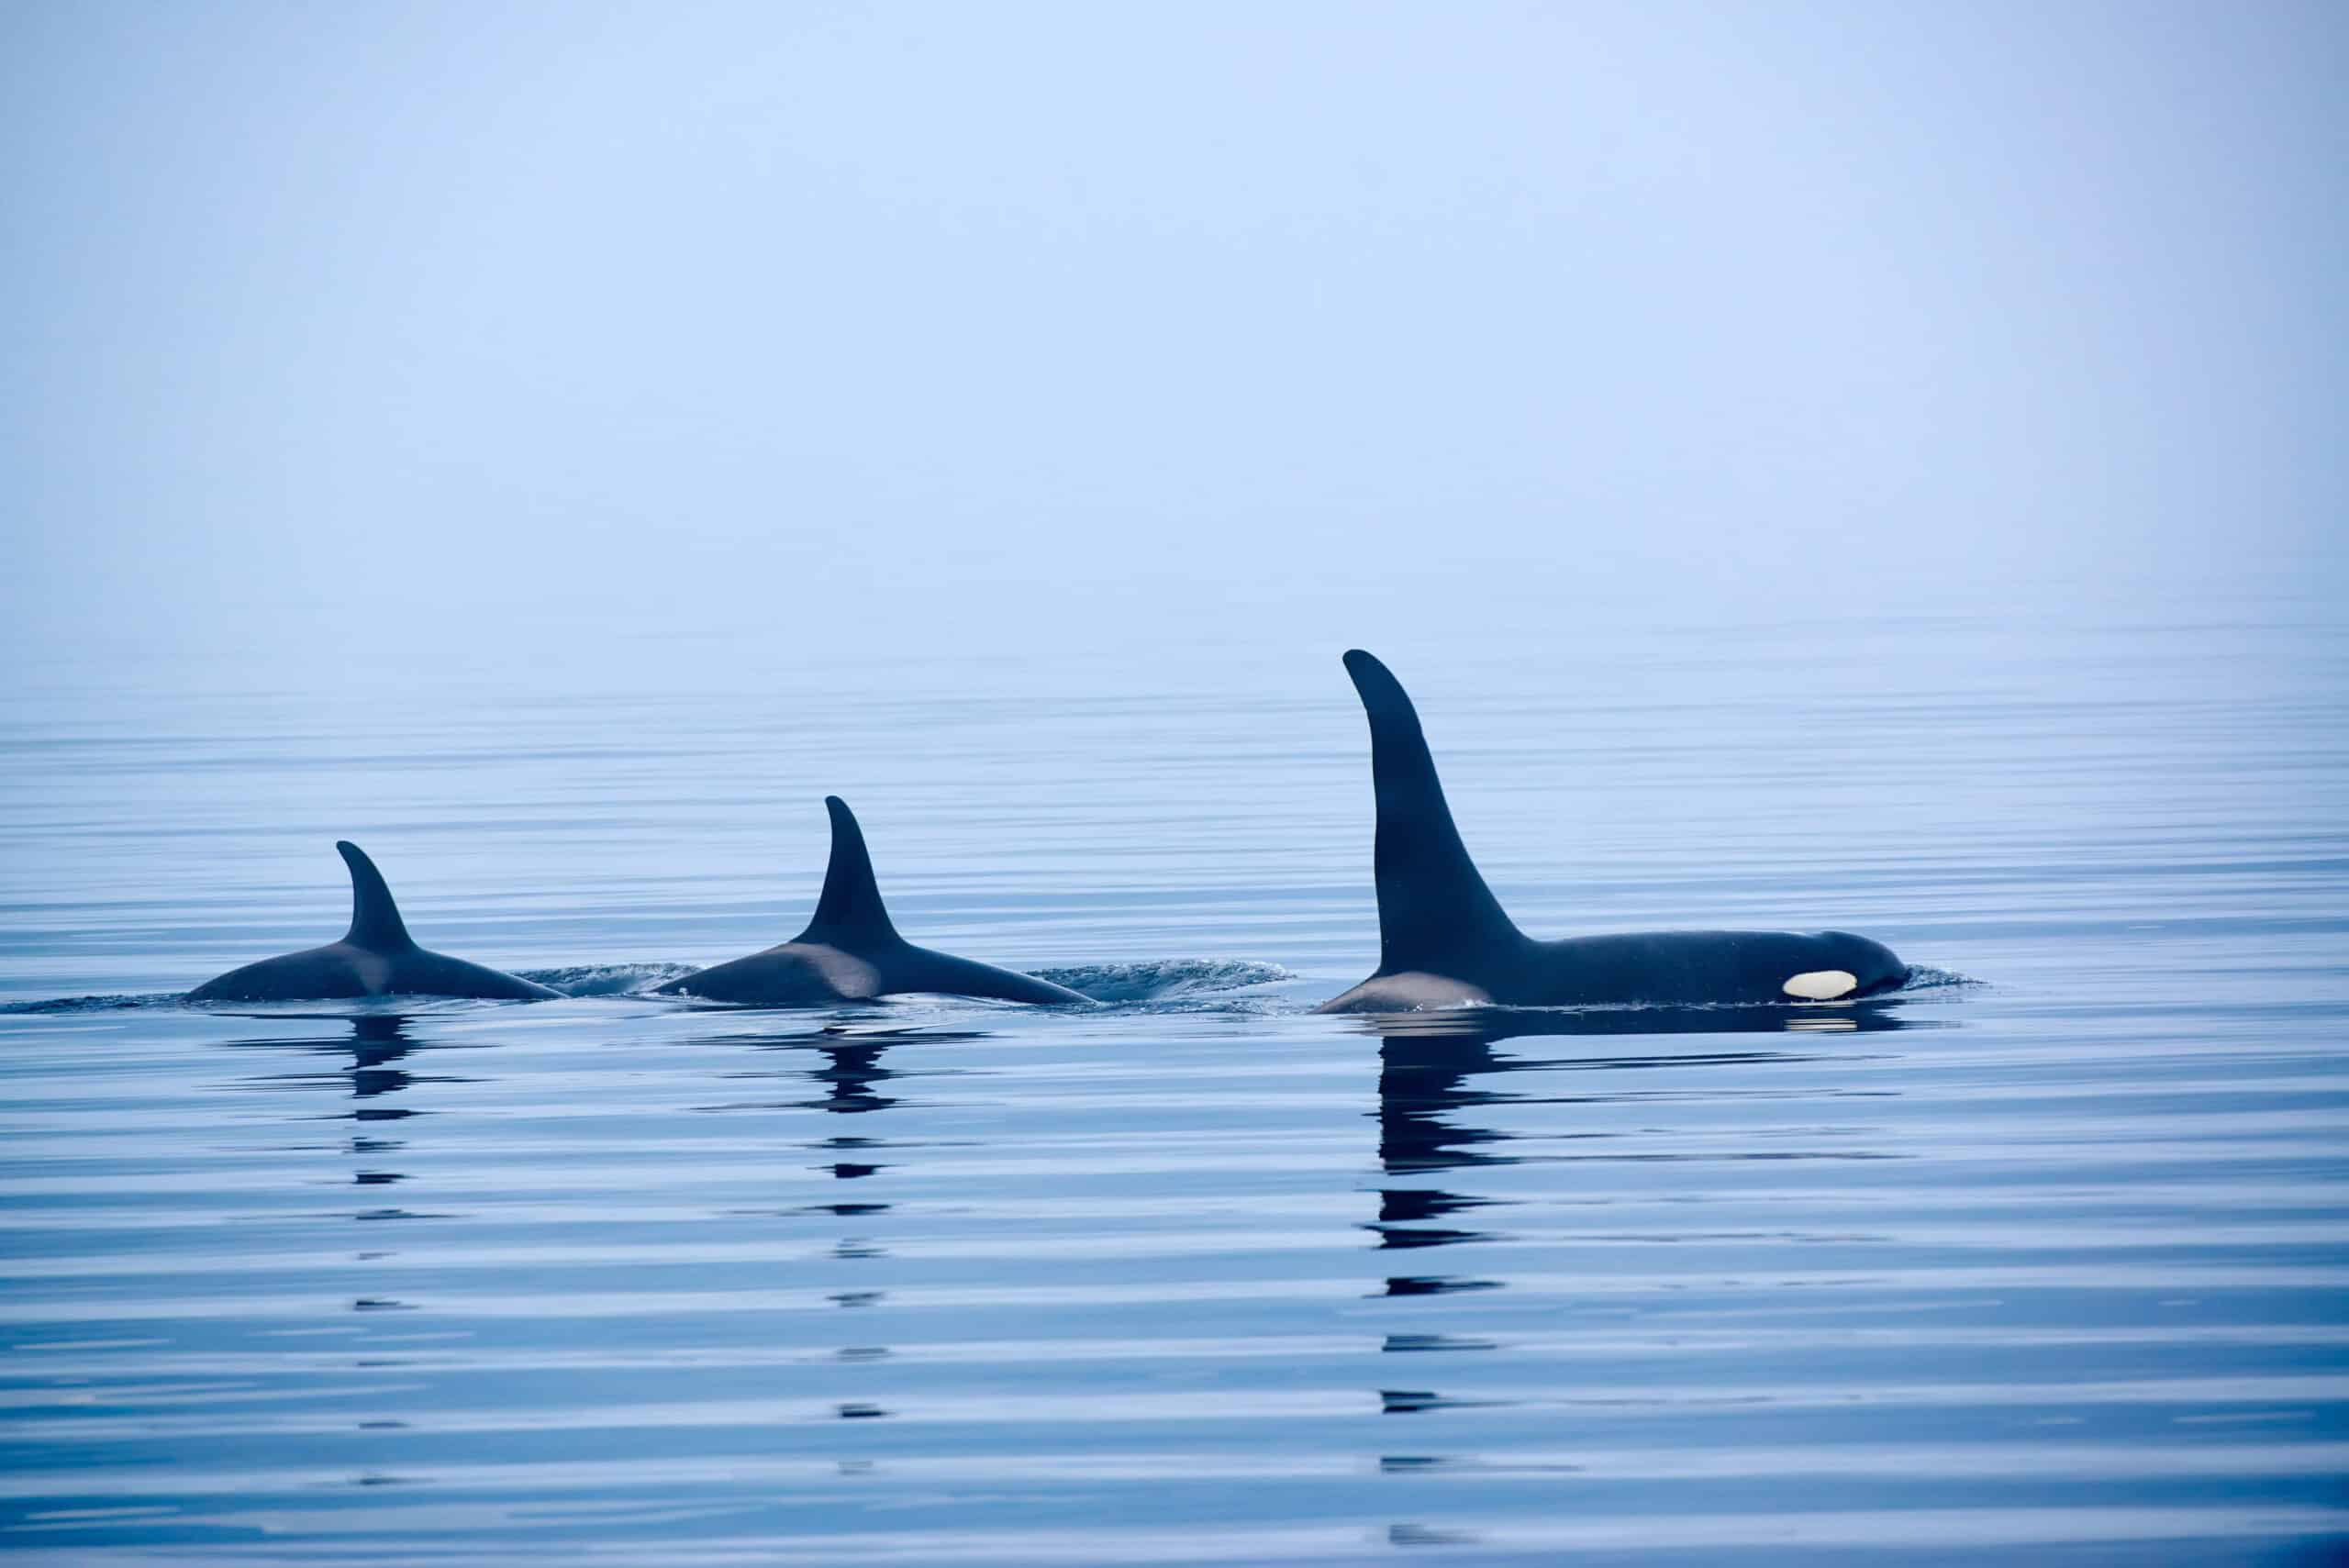 <p>Orcas inhabit all of the world’s oceans, from the polar regions to tropical seas. They are most commonly found in the Arctic, Antarctic, and along coastlines where they hunt for food.</p>           Sharks, lions, tigers, as well as all about cats & dogs!           <a href='https://www.msn.com/en-us/channel/source/Animals%20Around%20The%20Globe%20US/sr-vid-ryujycftmyx7d7tmb5trkya28raxe6r56iuty5739ky2rf5d5wws?ocid=anaheim-ntp-following&cvid=1ff21e393be1475a8b3dd9a83a86b8df&ei=10'>           Click here to get to the Animals Around The Globe profile page</a><b> and hit "Follow" to never miss out.</b>